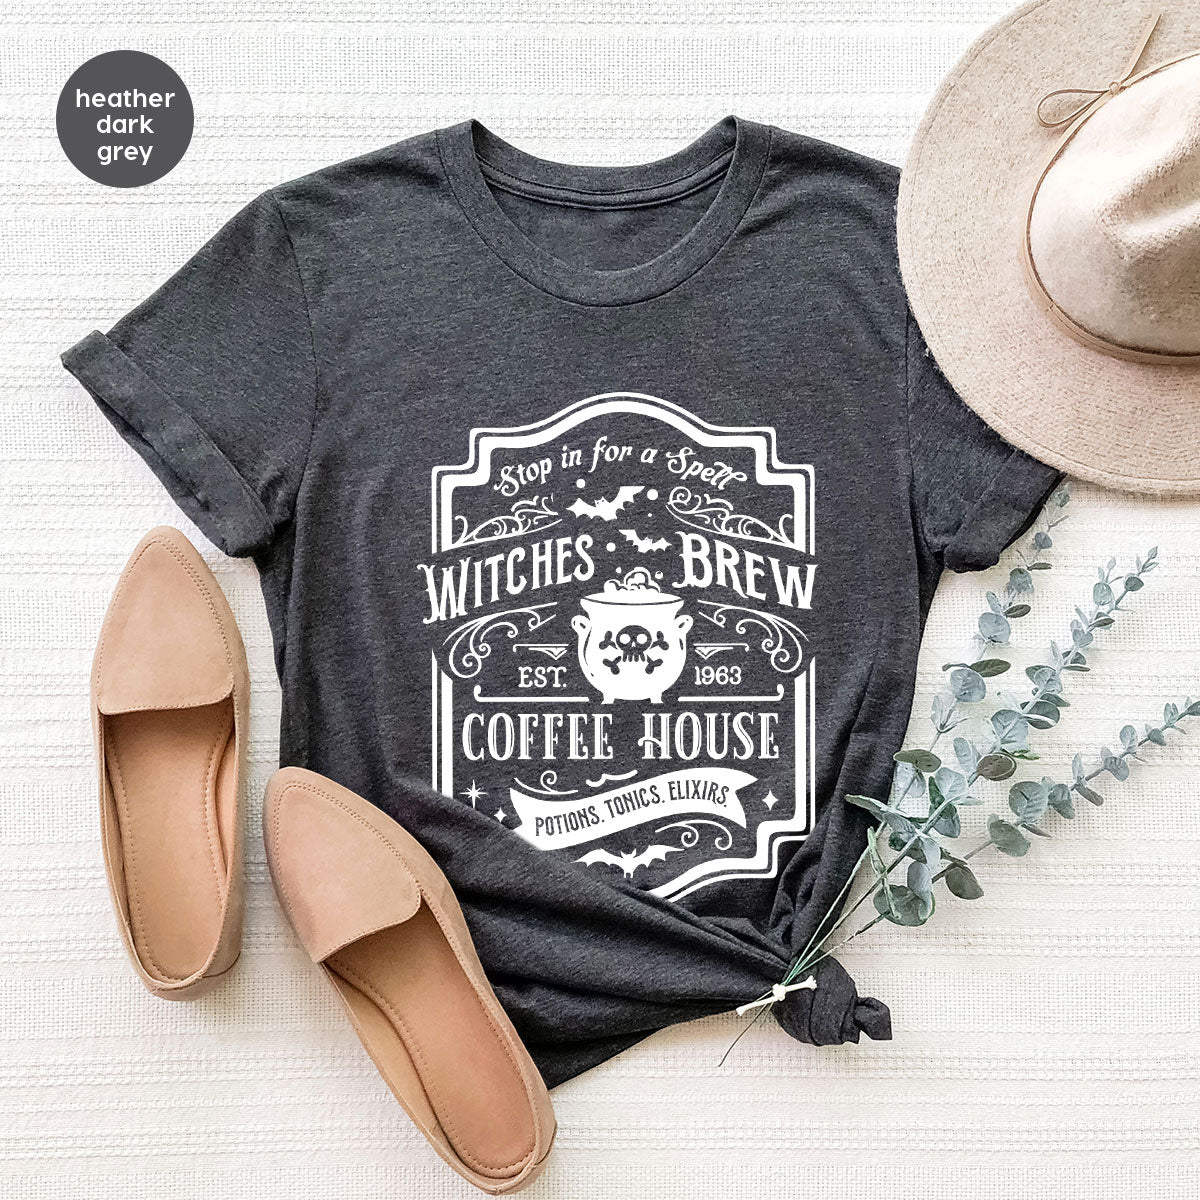 Halloween Shirt, Witchy Gifts, Spooky Season Tshirt, Spell Vneck T Shirt, Shirts for Women, Gifts for Her, Witch's Brew Graphic Tees